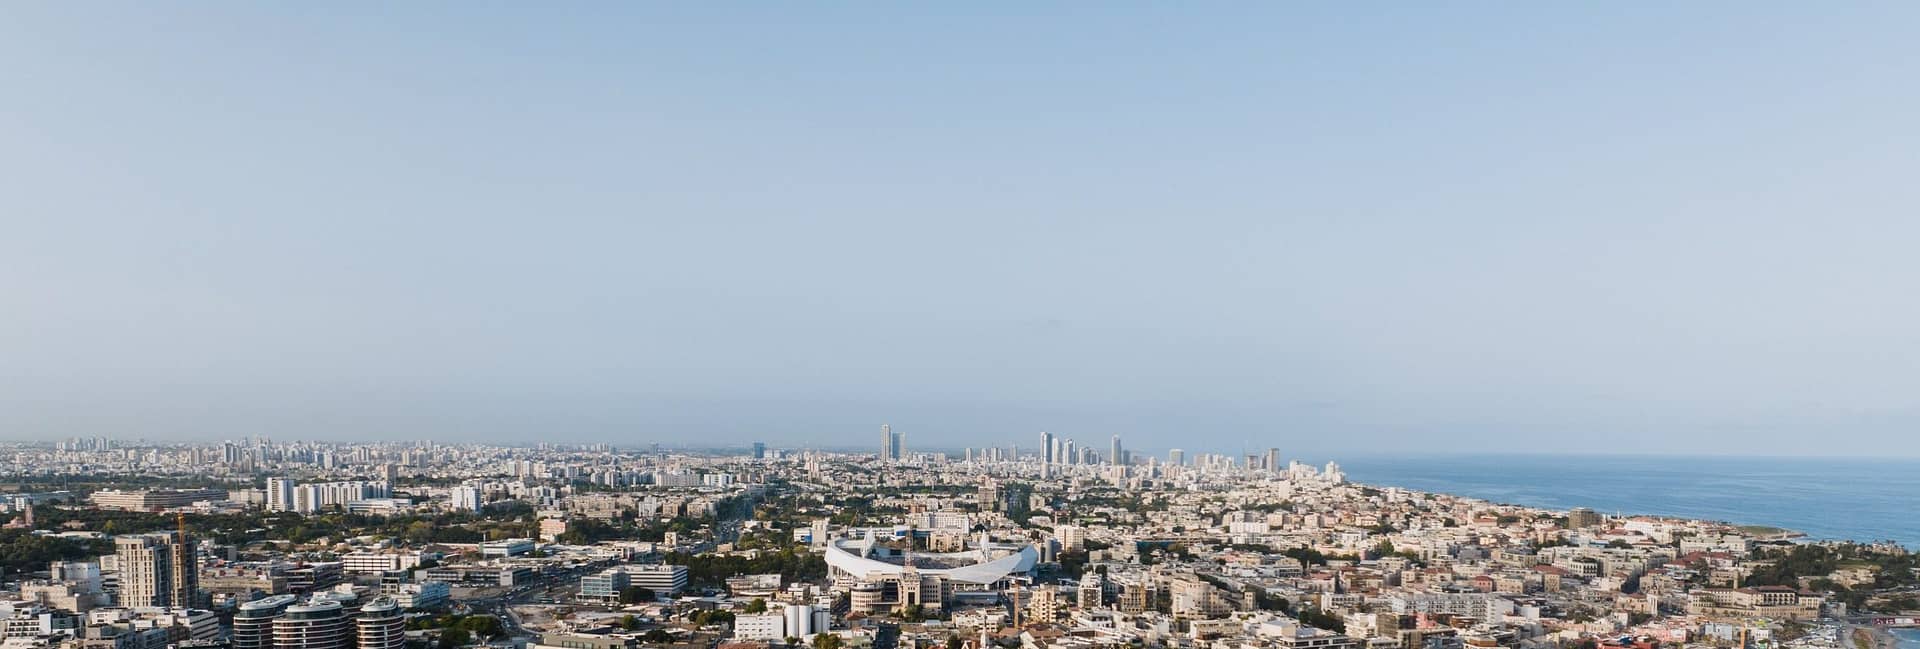 The picture of Tel Aviv city